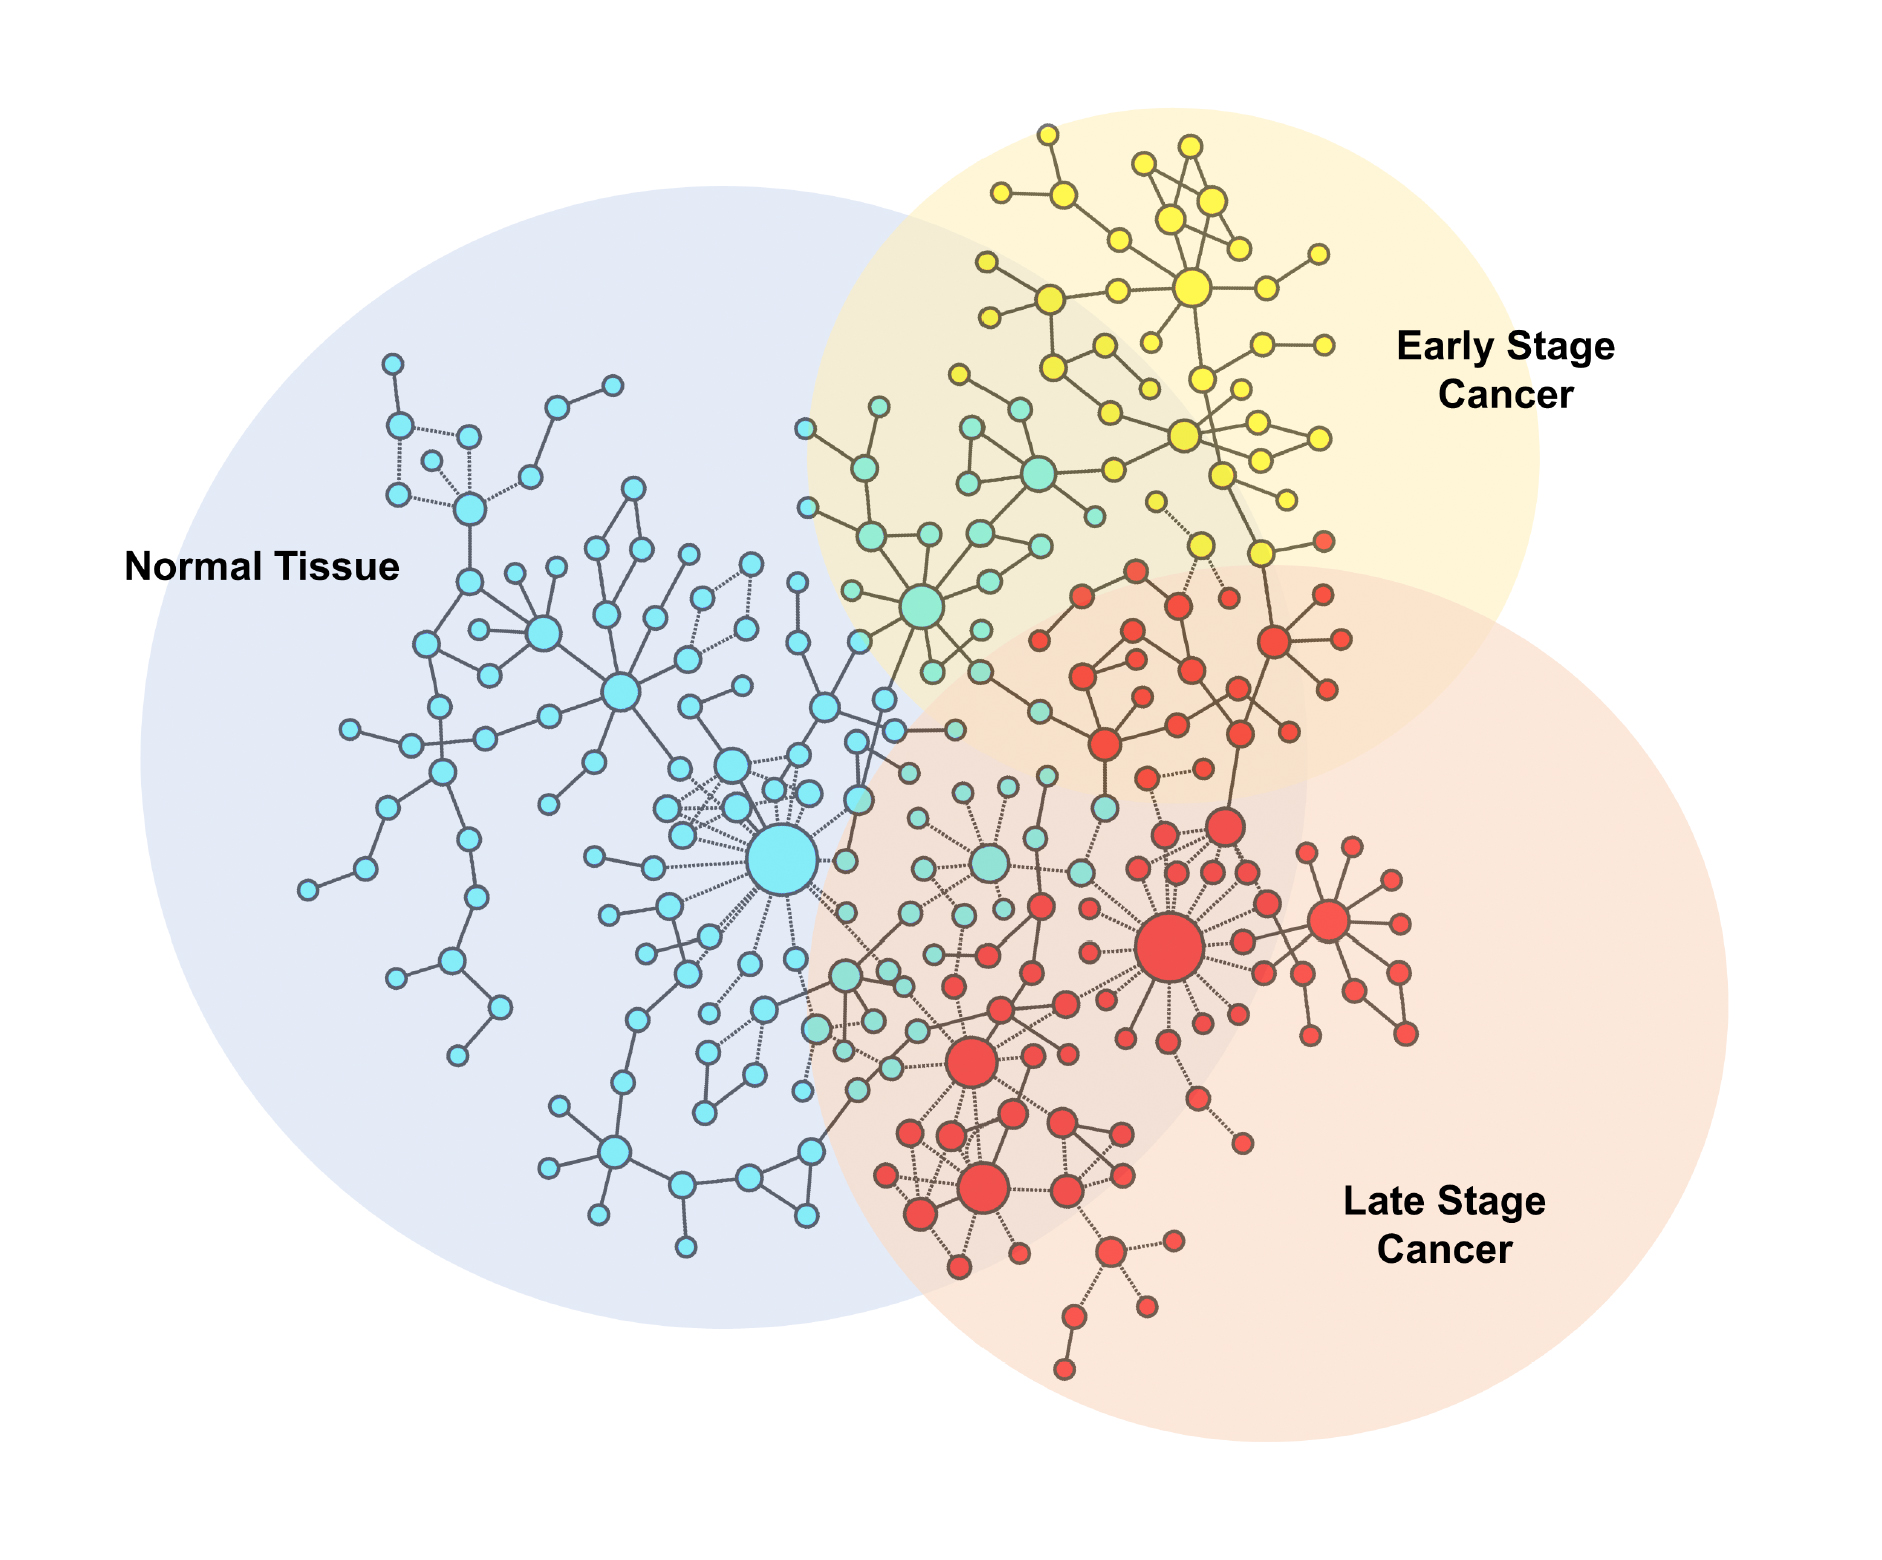 Network connections during various stages of cancer. (Graphic courtesy Zainab Arshad) 